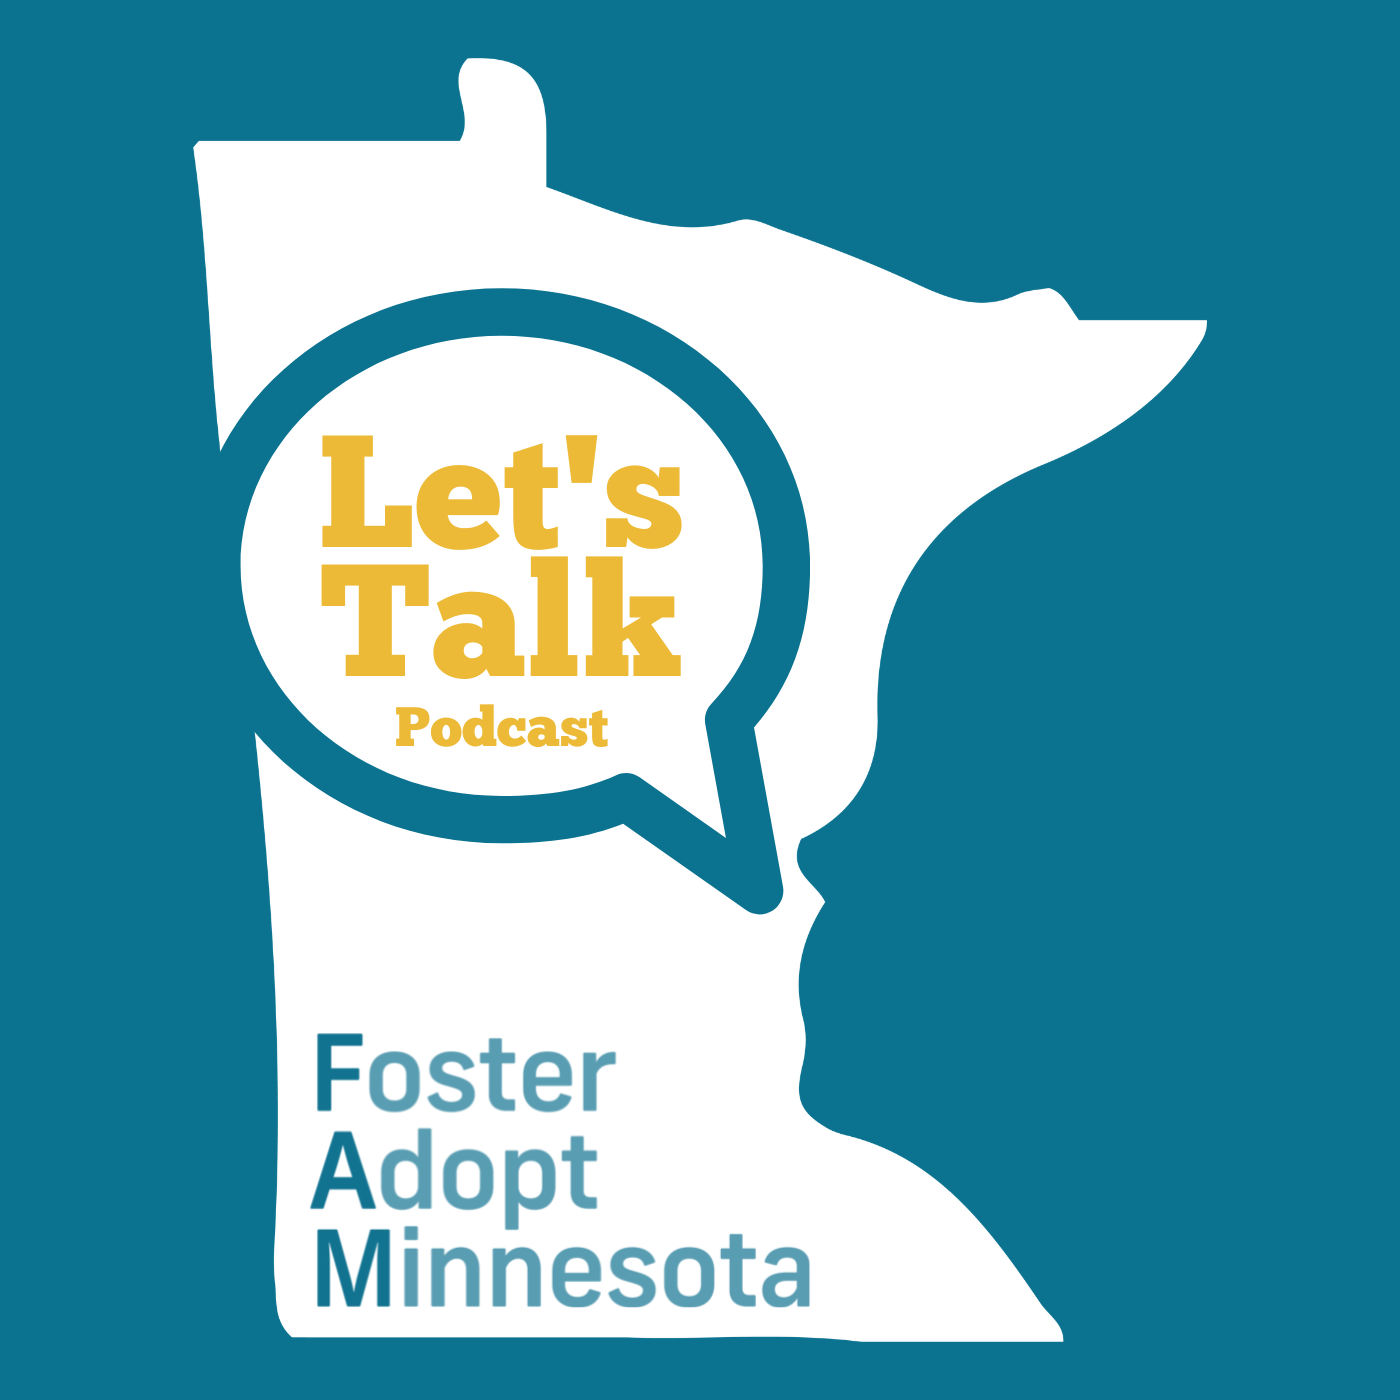 Let's Talk: A Foster Adopt Minnesota Podcast